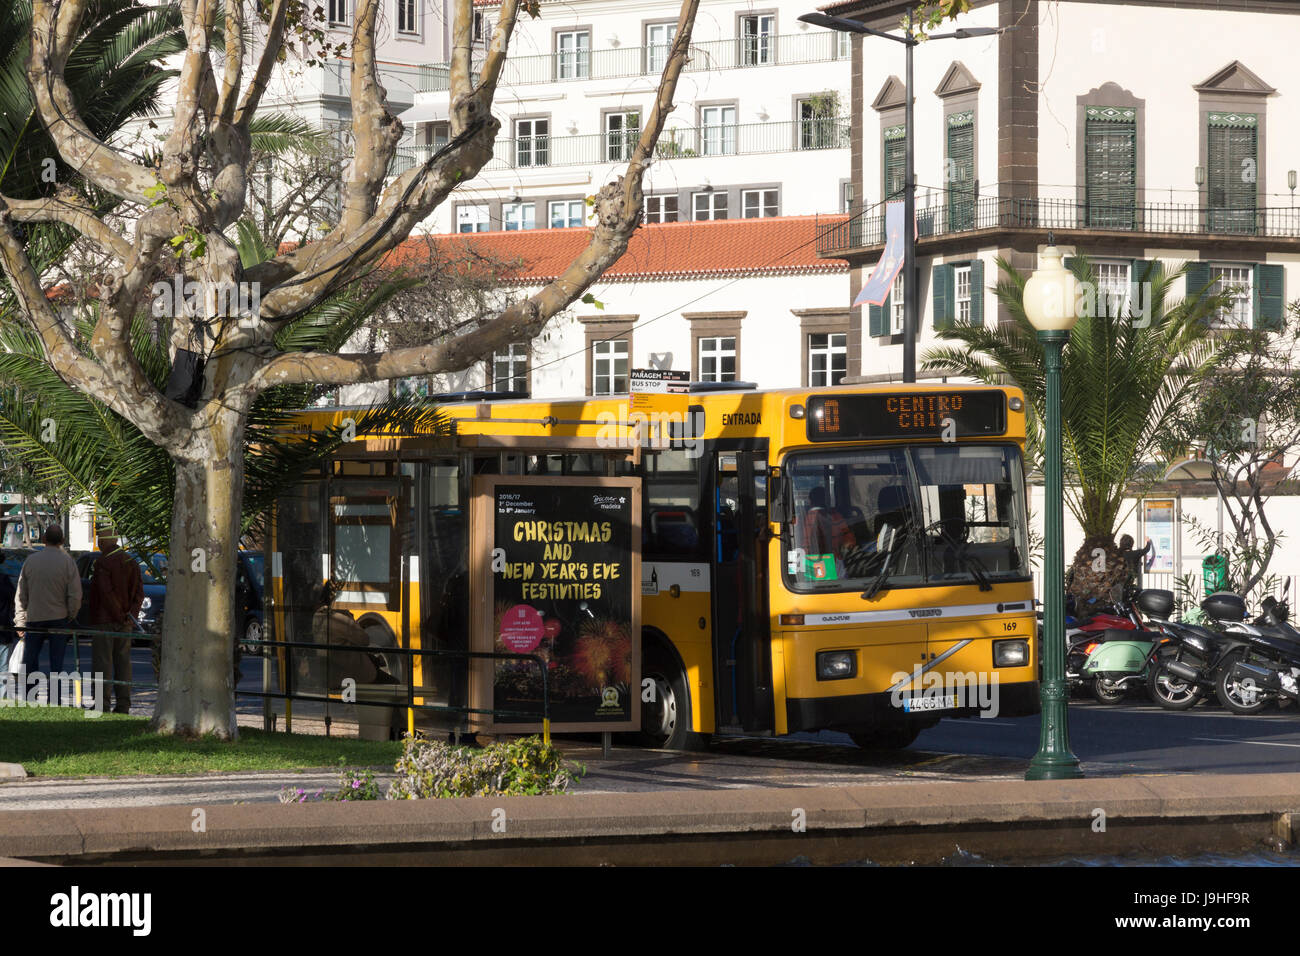 A bus at a bus stop advertising Christmas and New Year's Eve festivities in Funchal, Madeira Stock Photo